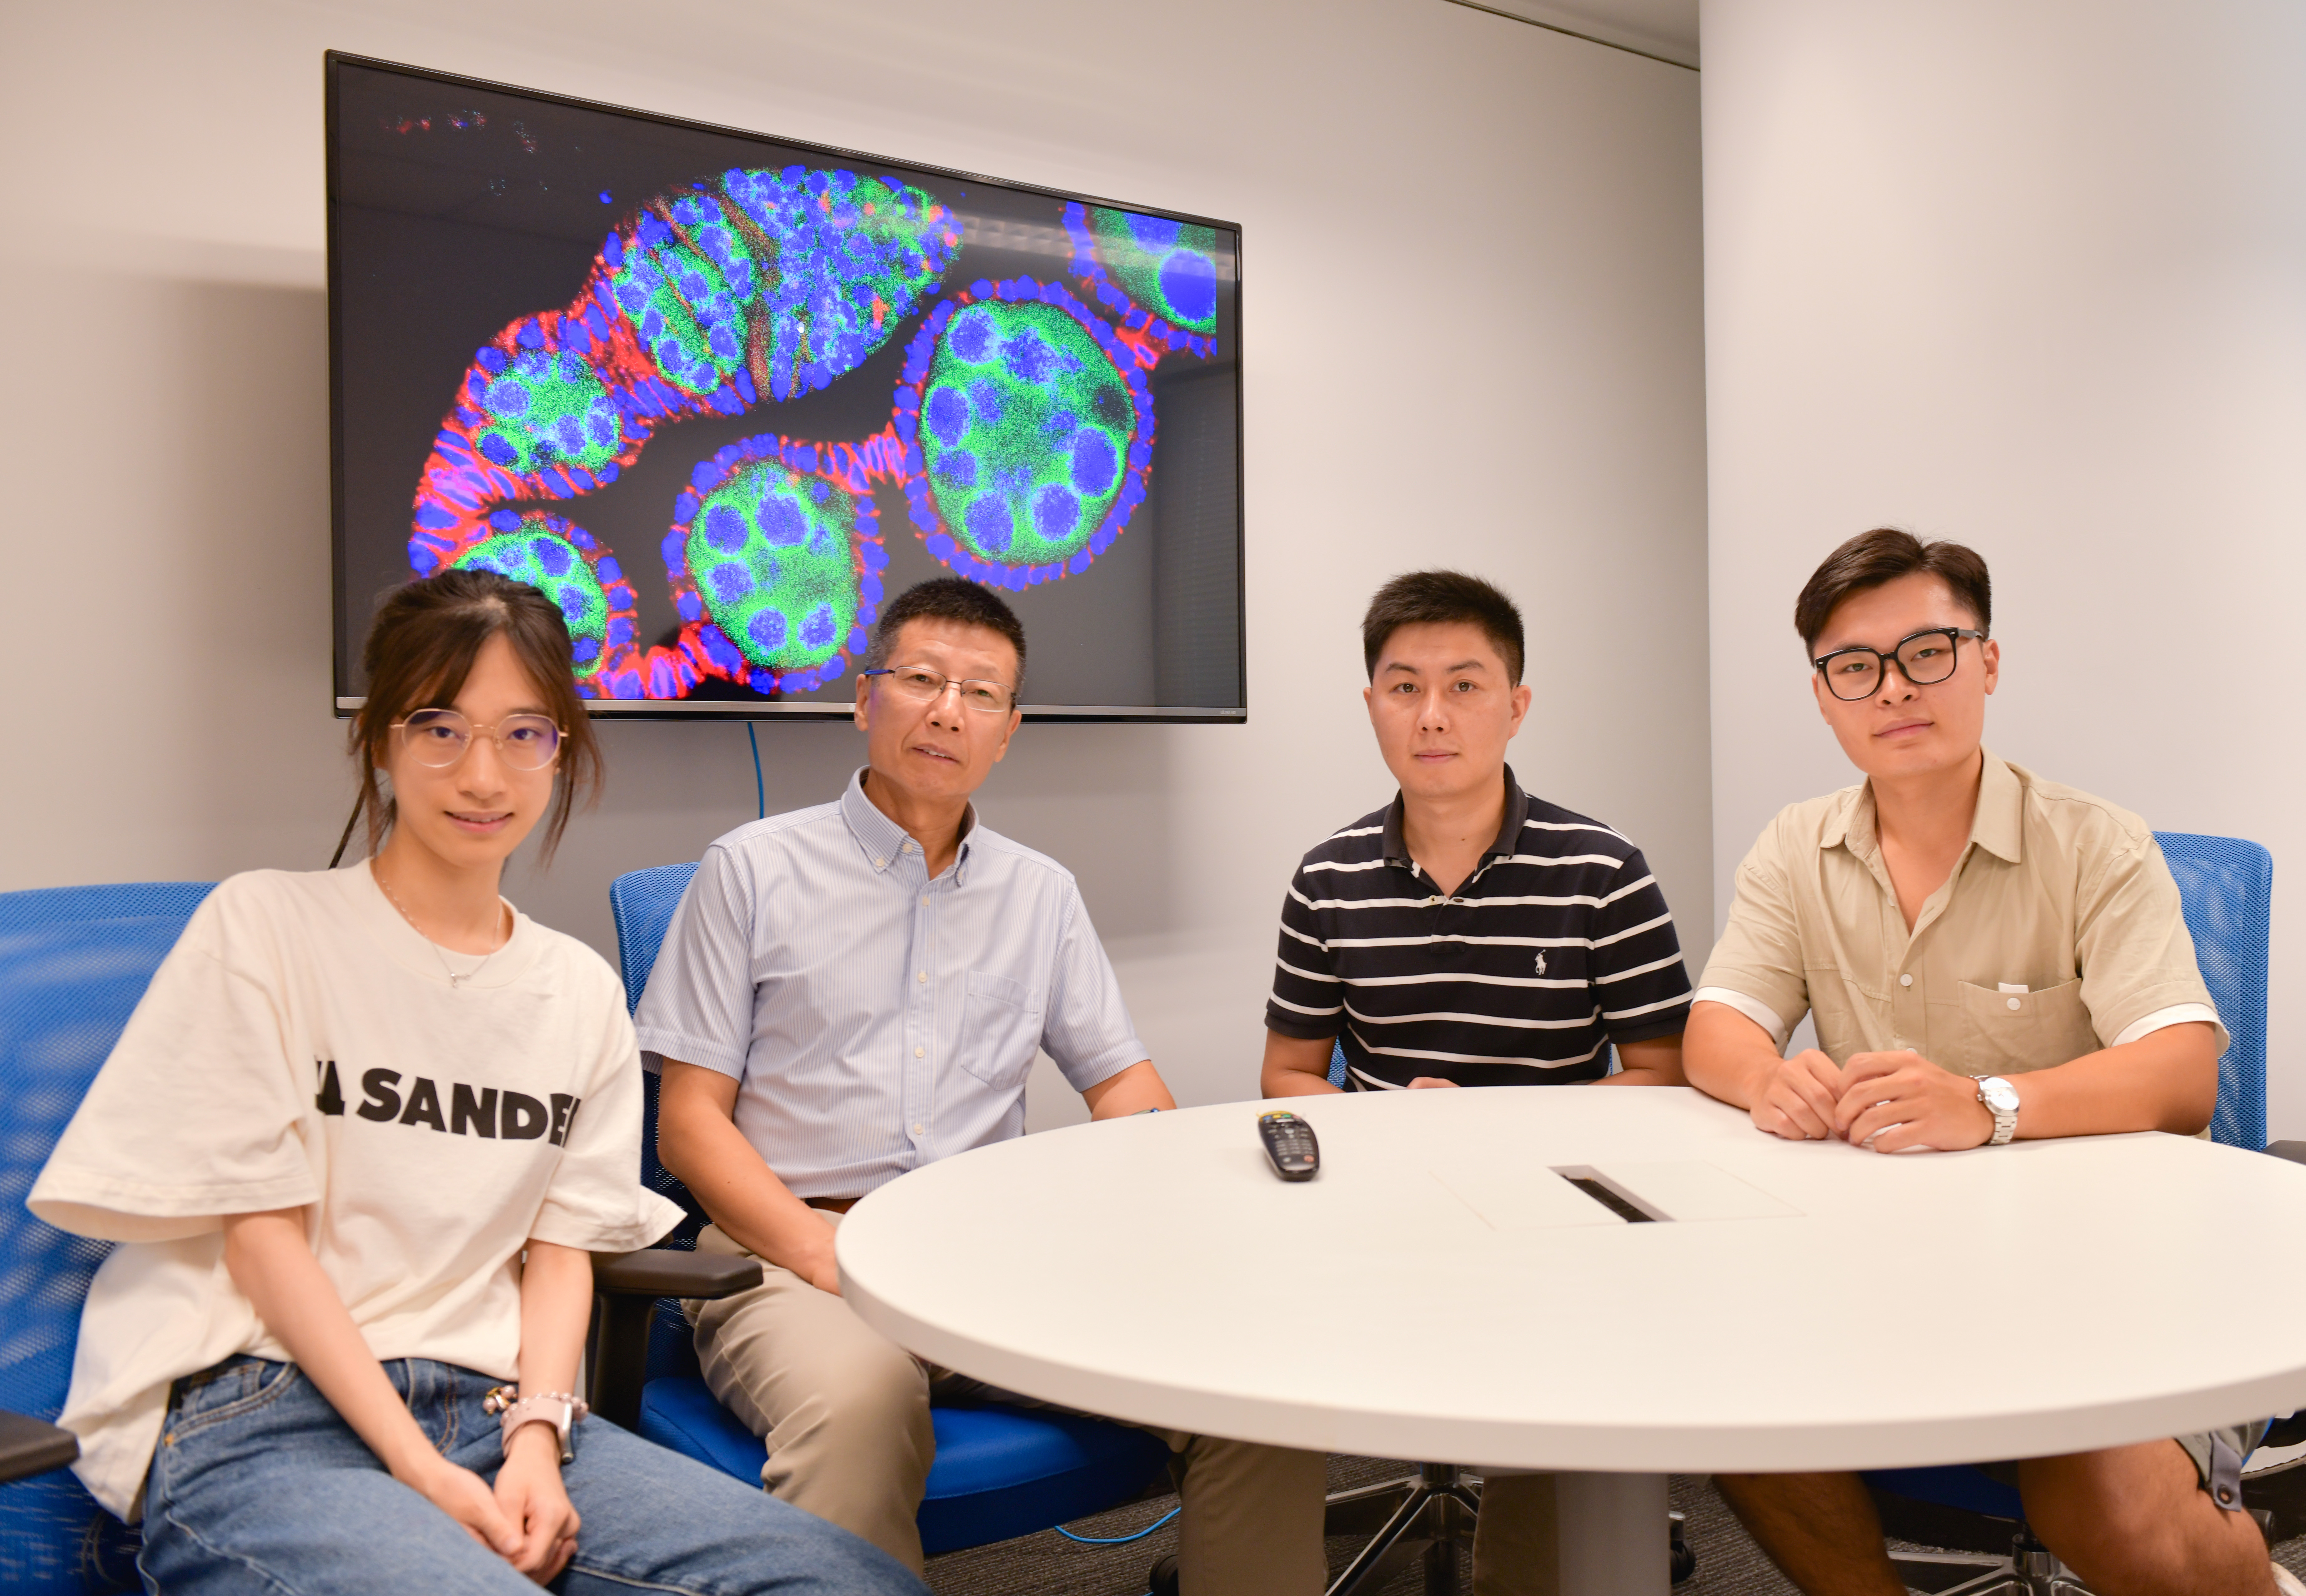 Prof. XIE Ting, Head and Chair Professor of HKUST’s Division of Life Science (second left), Dr. TU Renjun, Research Assistant Professor of HKUST’s Division of Life Science (second right) and other members of the research team.